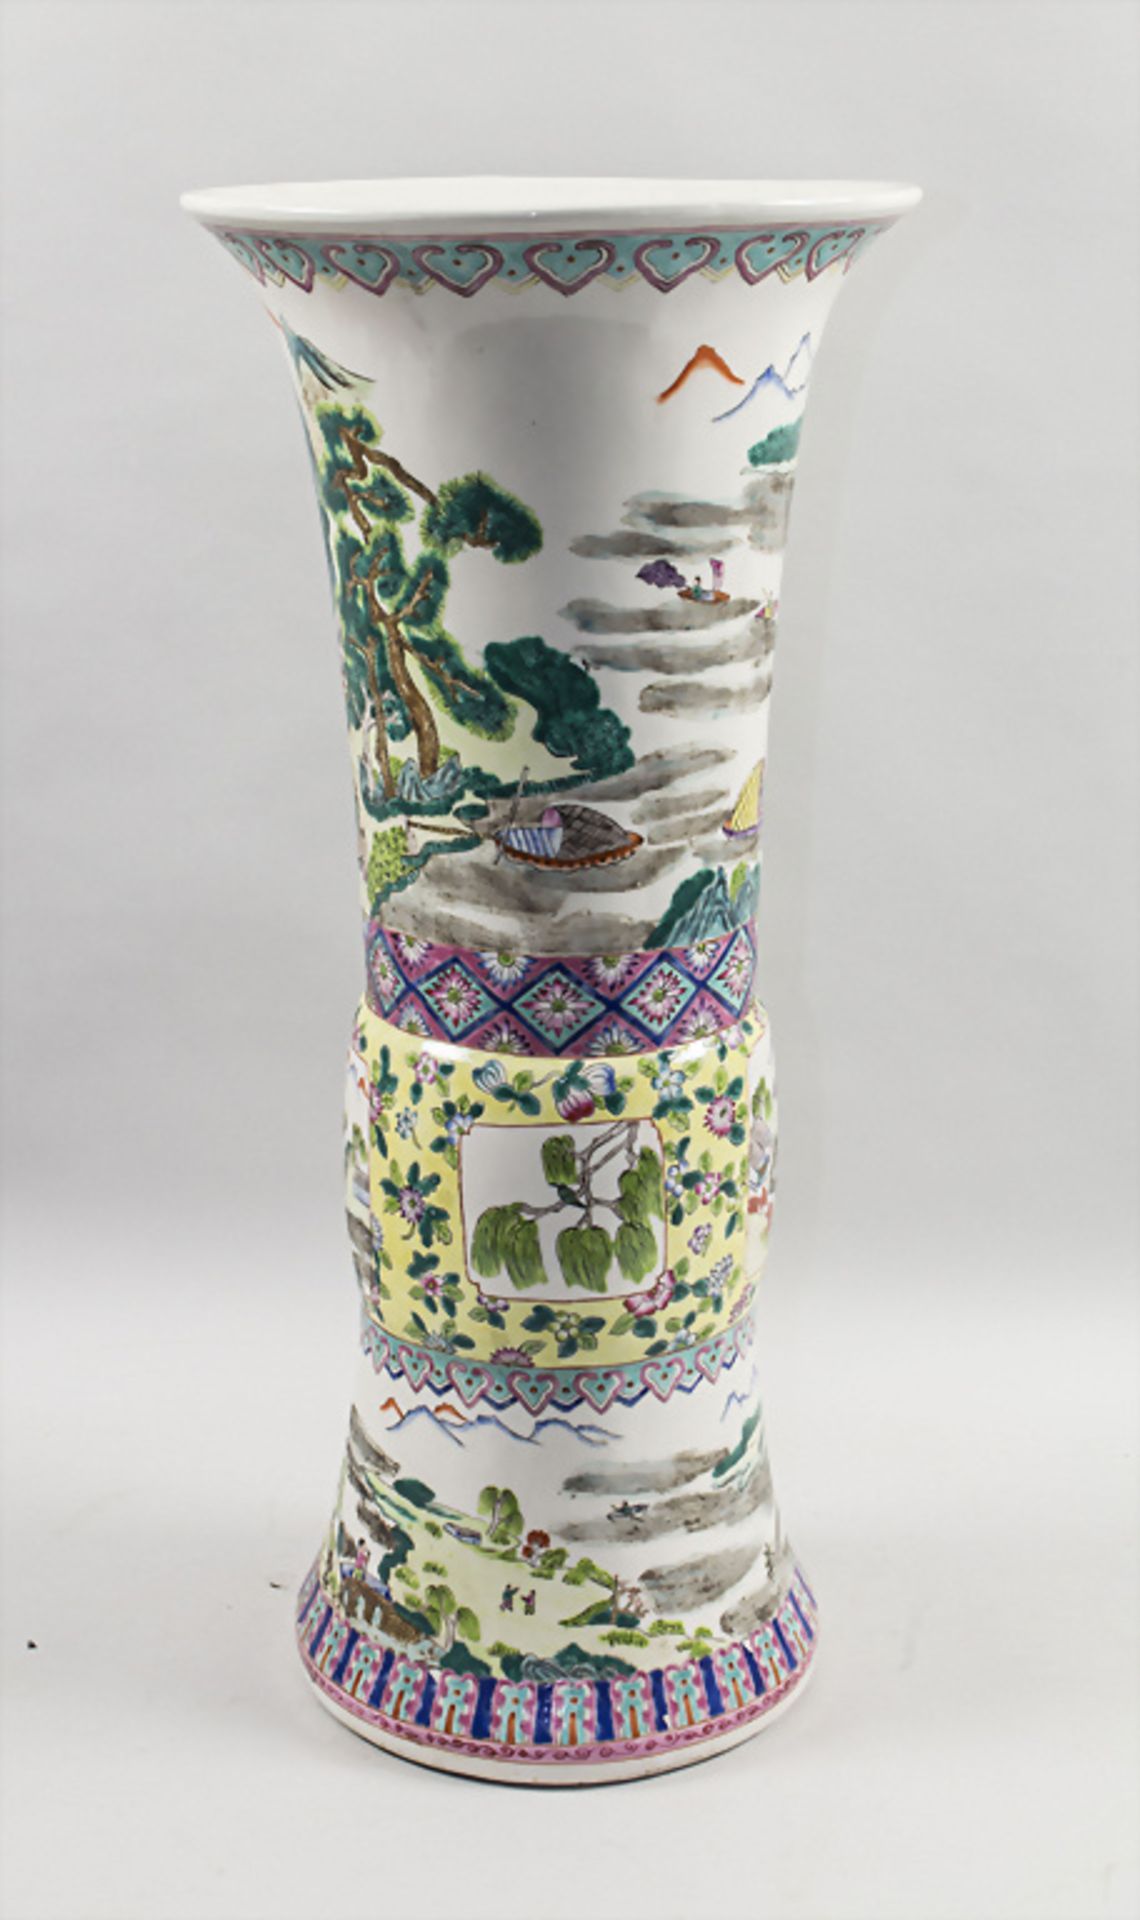 Große Gu Bodenvase / A large Gu vase, wohl Qing-Periode, China - Image 5 of 10